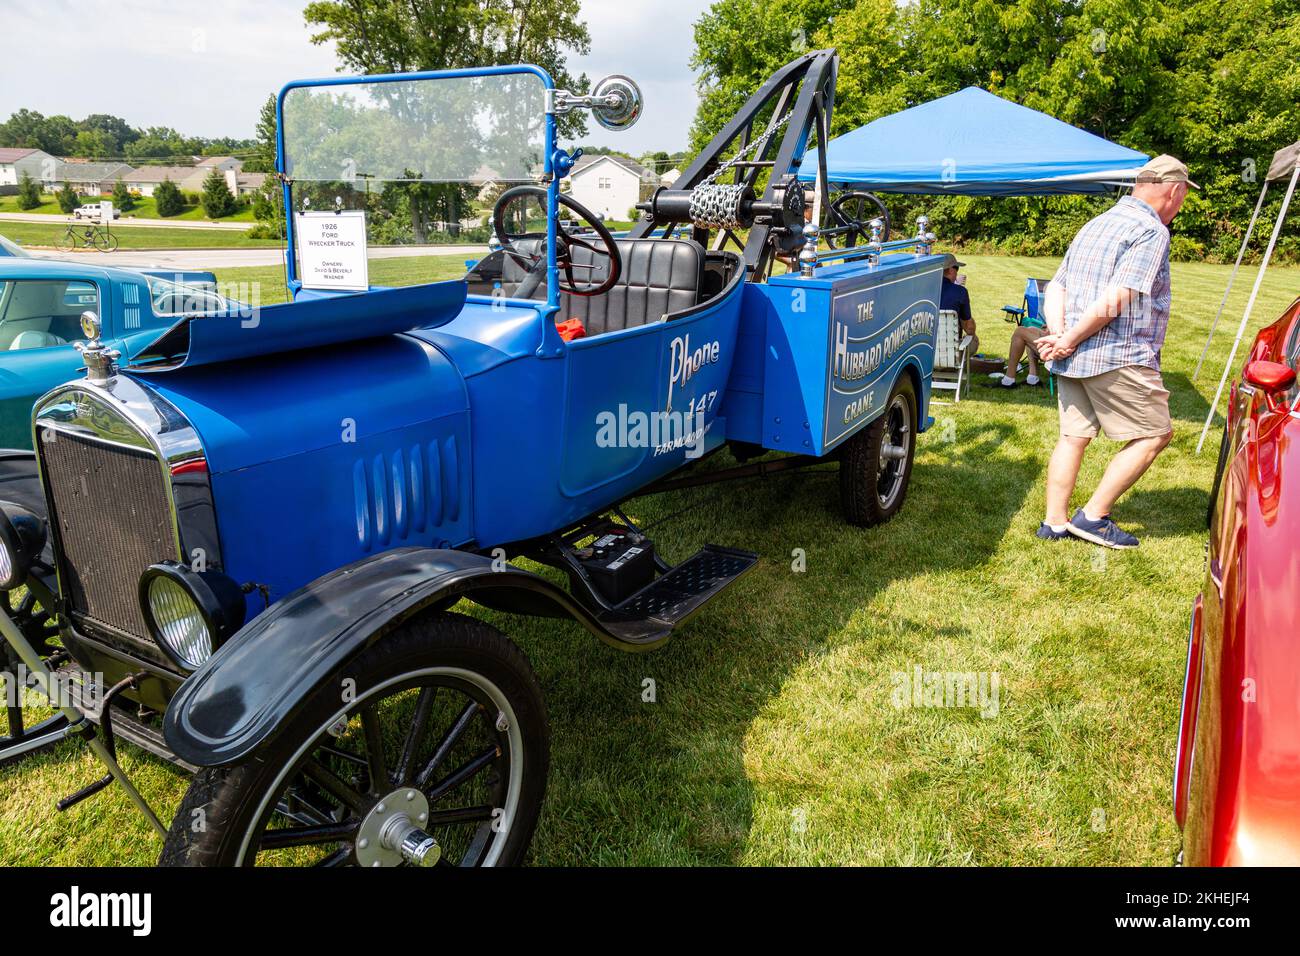 A blue Ford Model T tow truck on display at a car show in Fort Wayne, Indiana, USA. Stock Photo